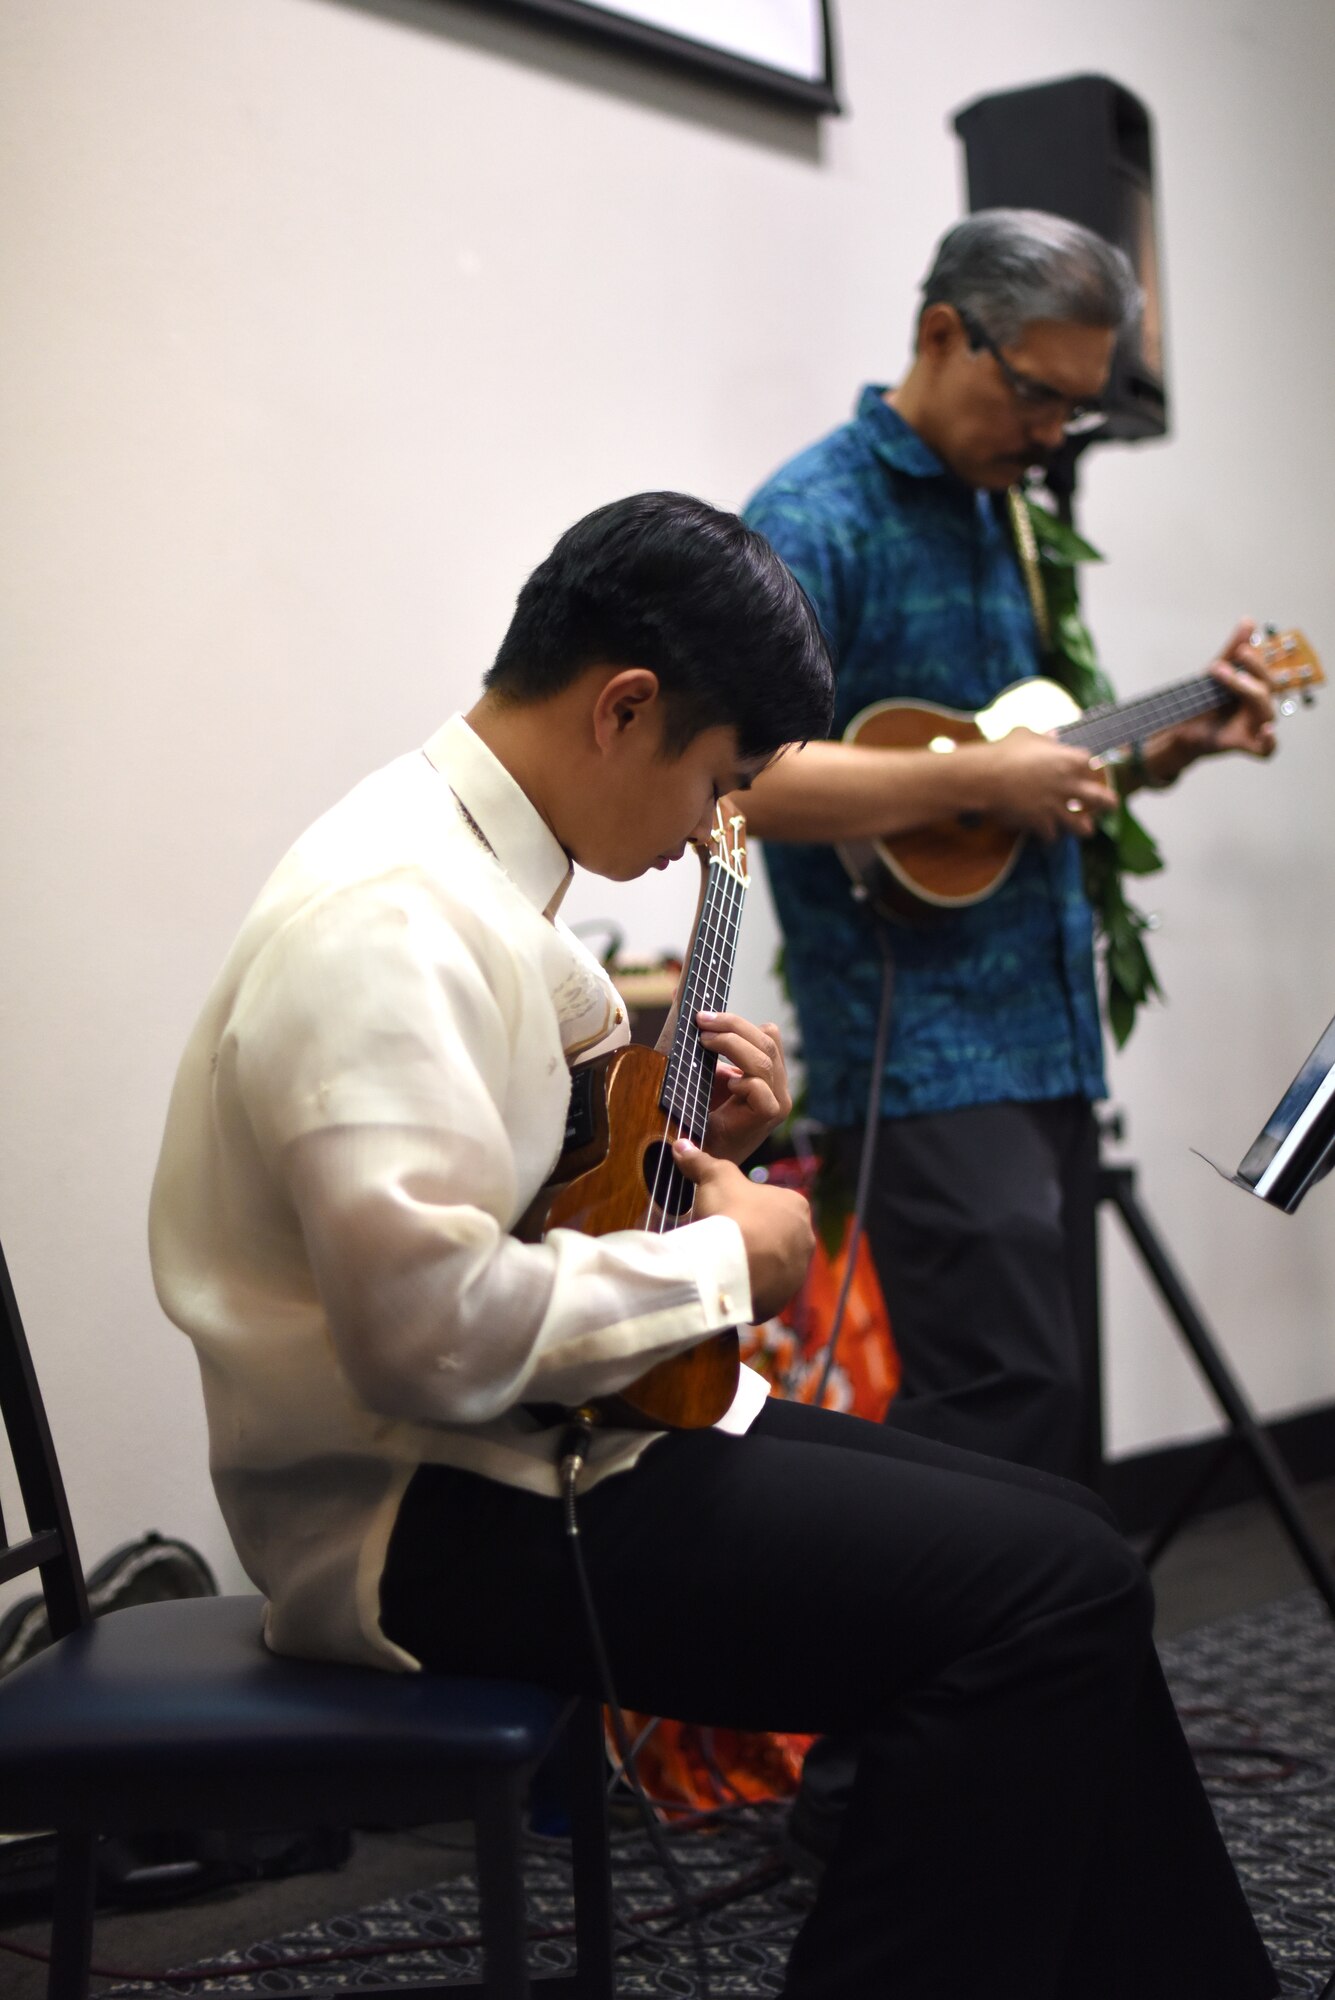 Abraham Salomon III and Joe Aquino, participants at the Asian American Pacific Islander Heritage Month Culture Event, perform multiple songs on the ukulele at the event center on Goodfellow Air Force Base, Texas, May 22, 2019. During the performance individuals performed different Samoan dances. (U.S. Air Force photo by Senior Airman Seraiah Hines/Released)